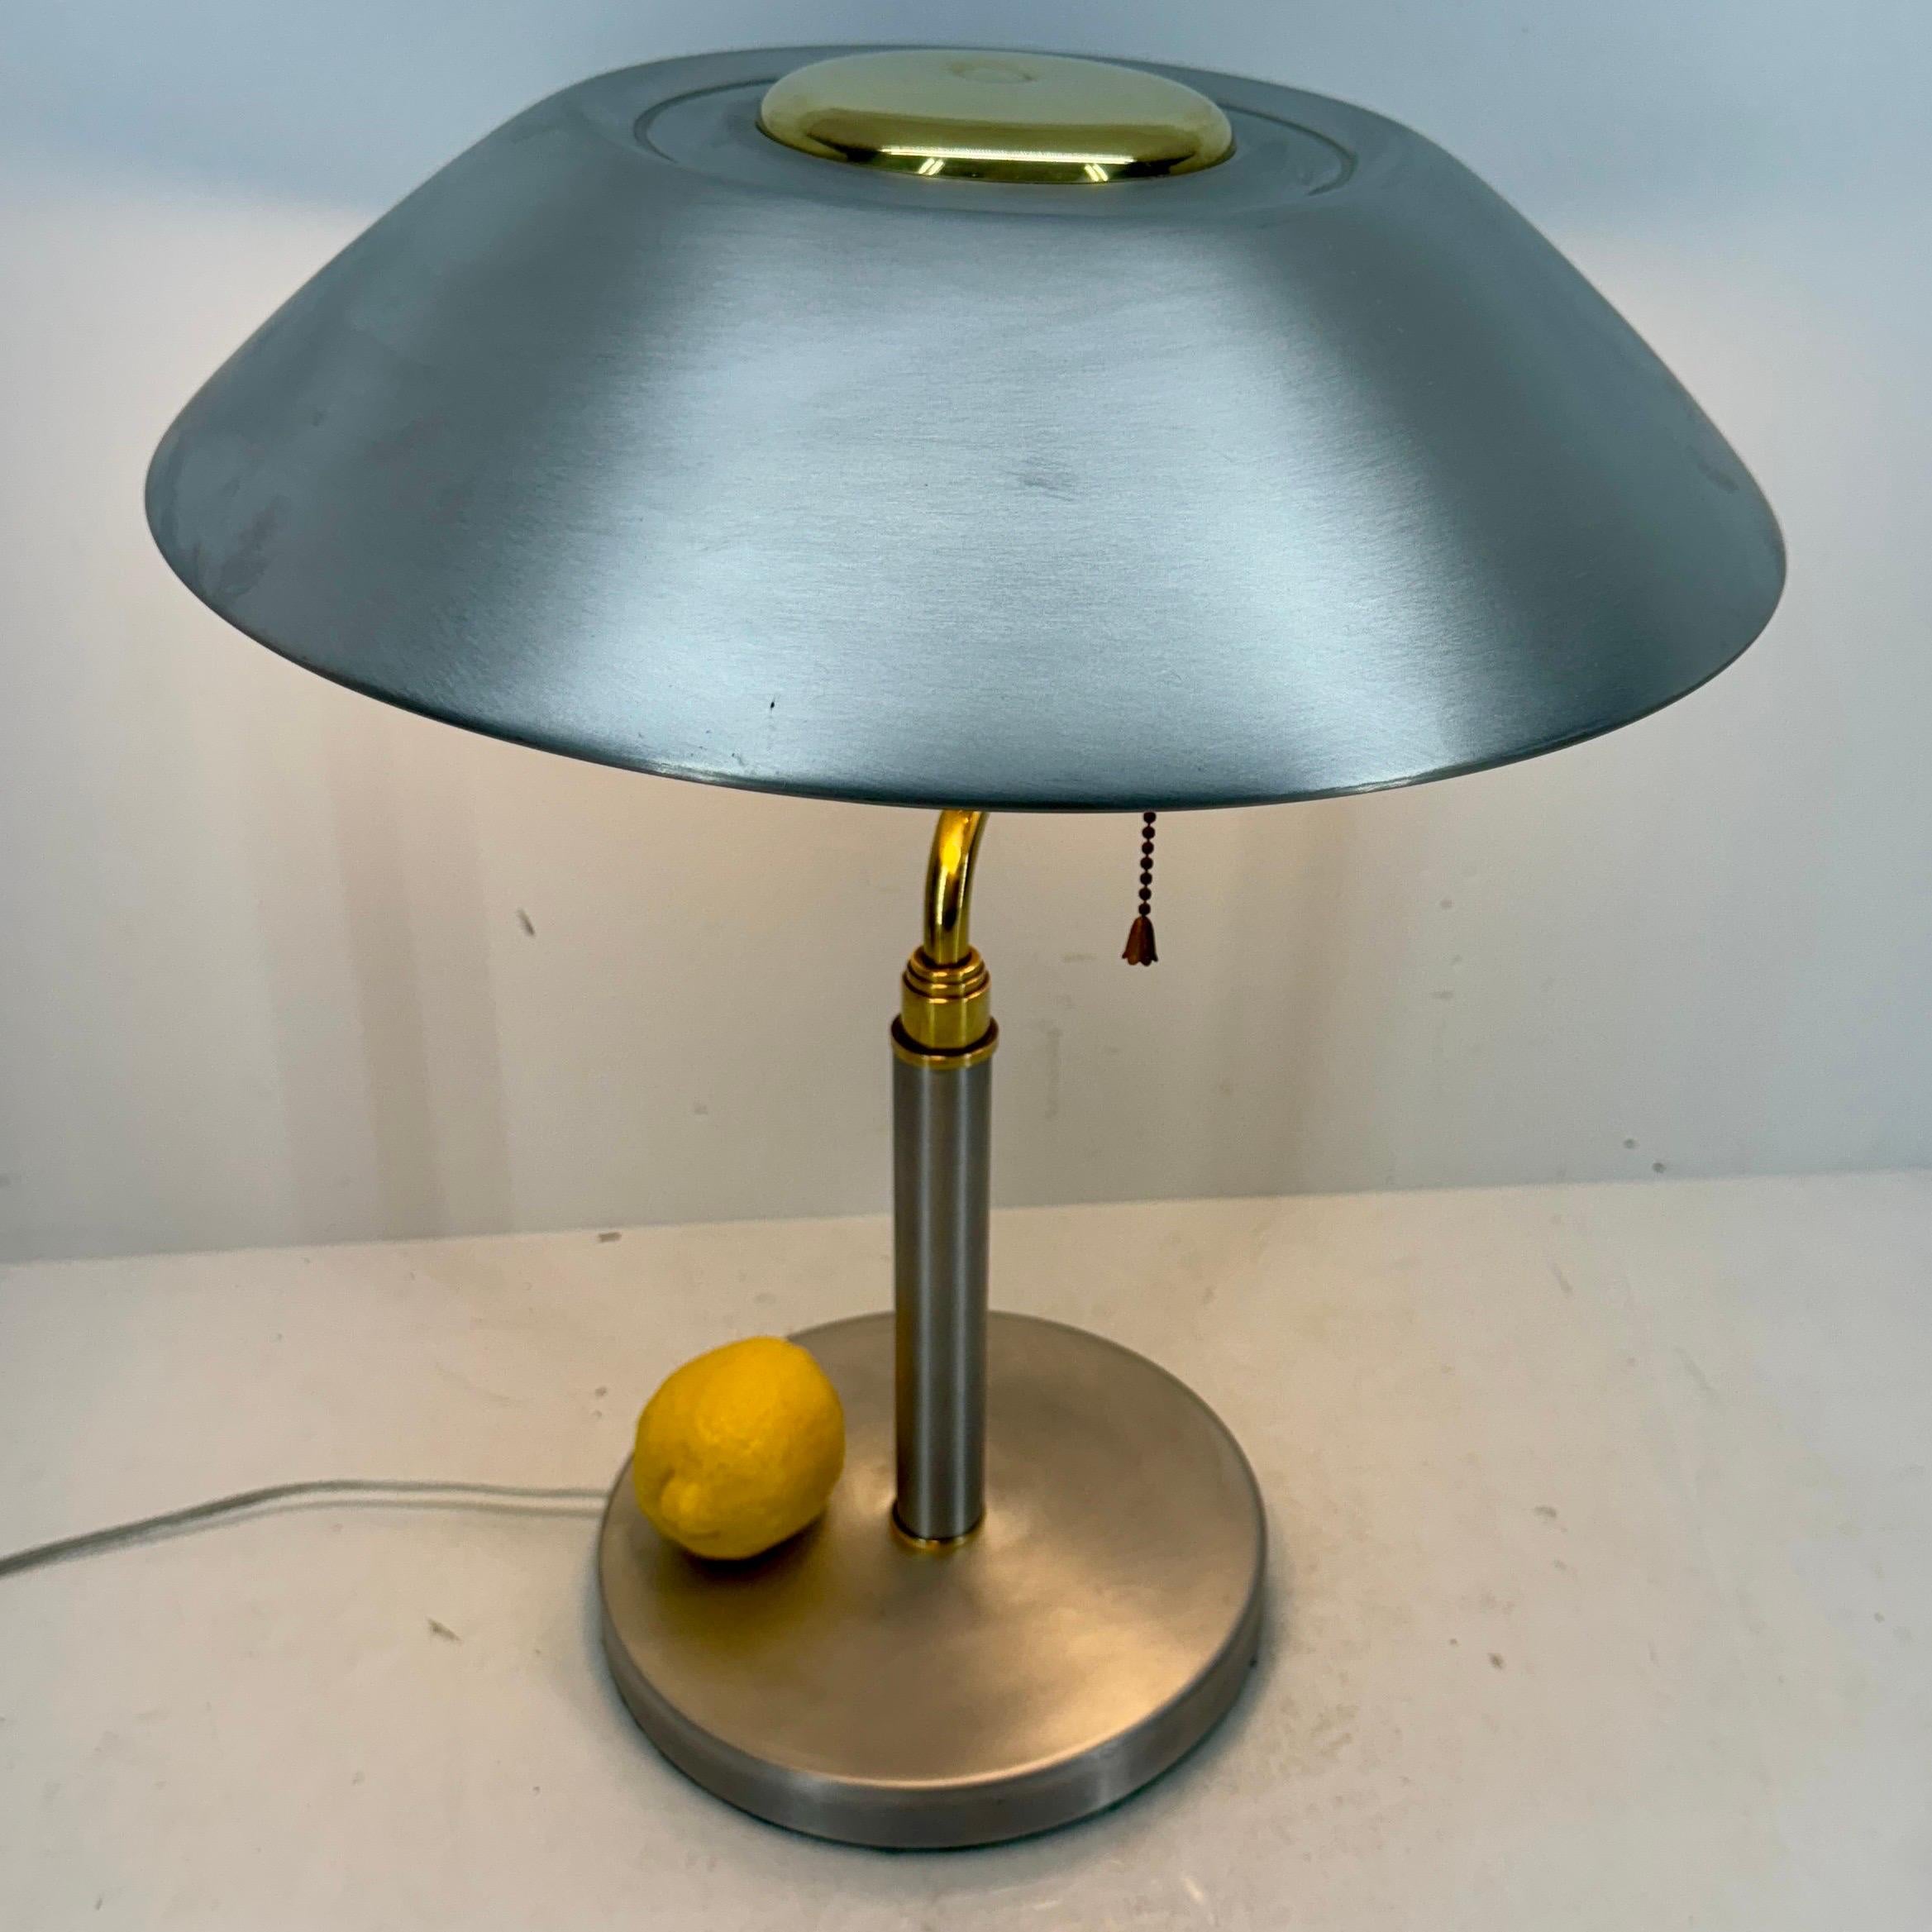 American Vintage Mid-Century Modern Desk Lamp in Aluminum and Brass  For Sale 8